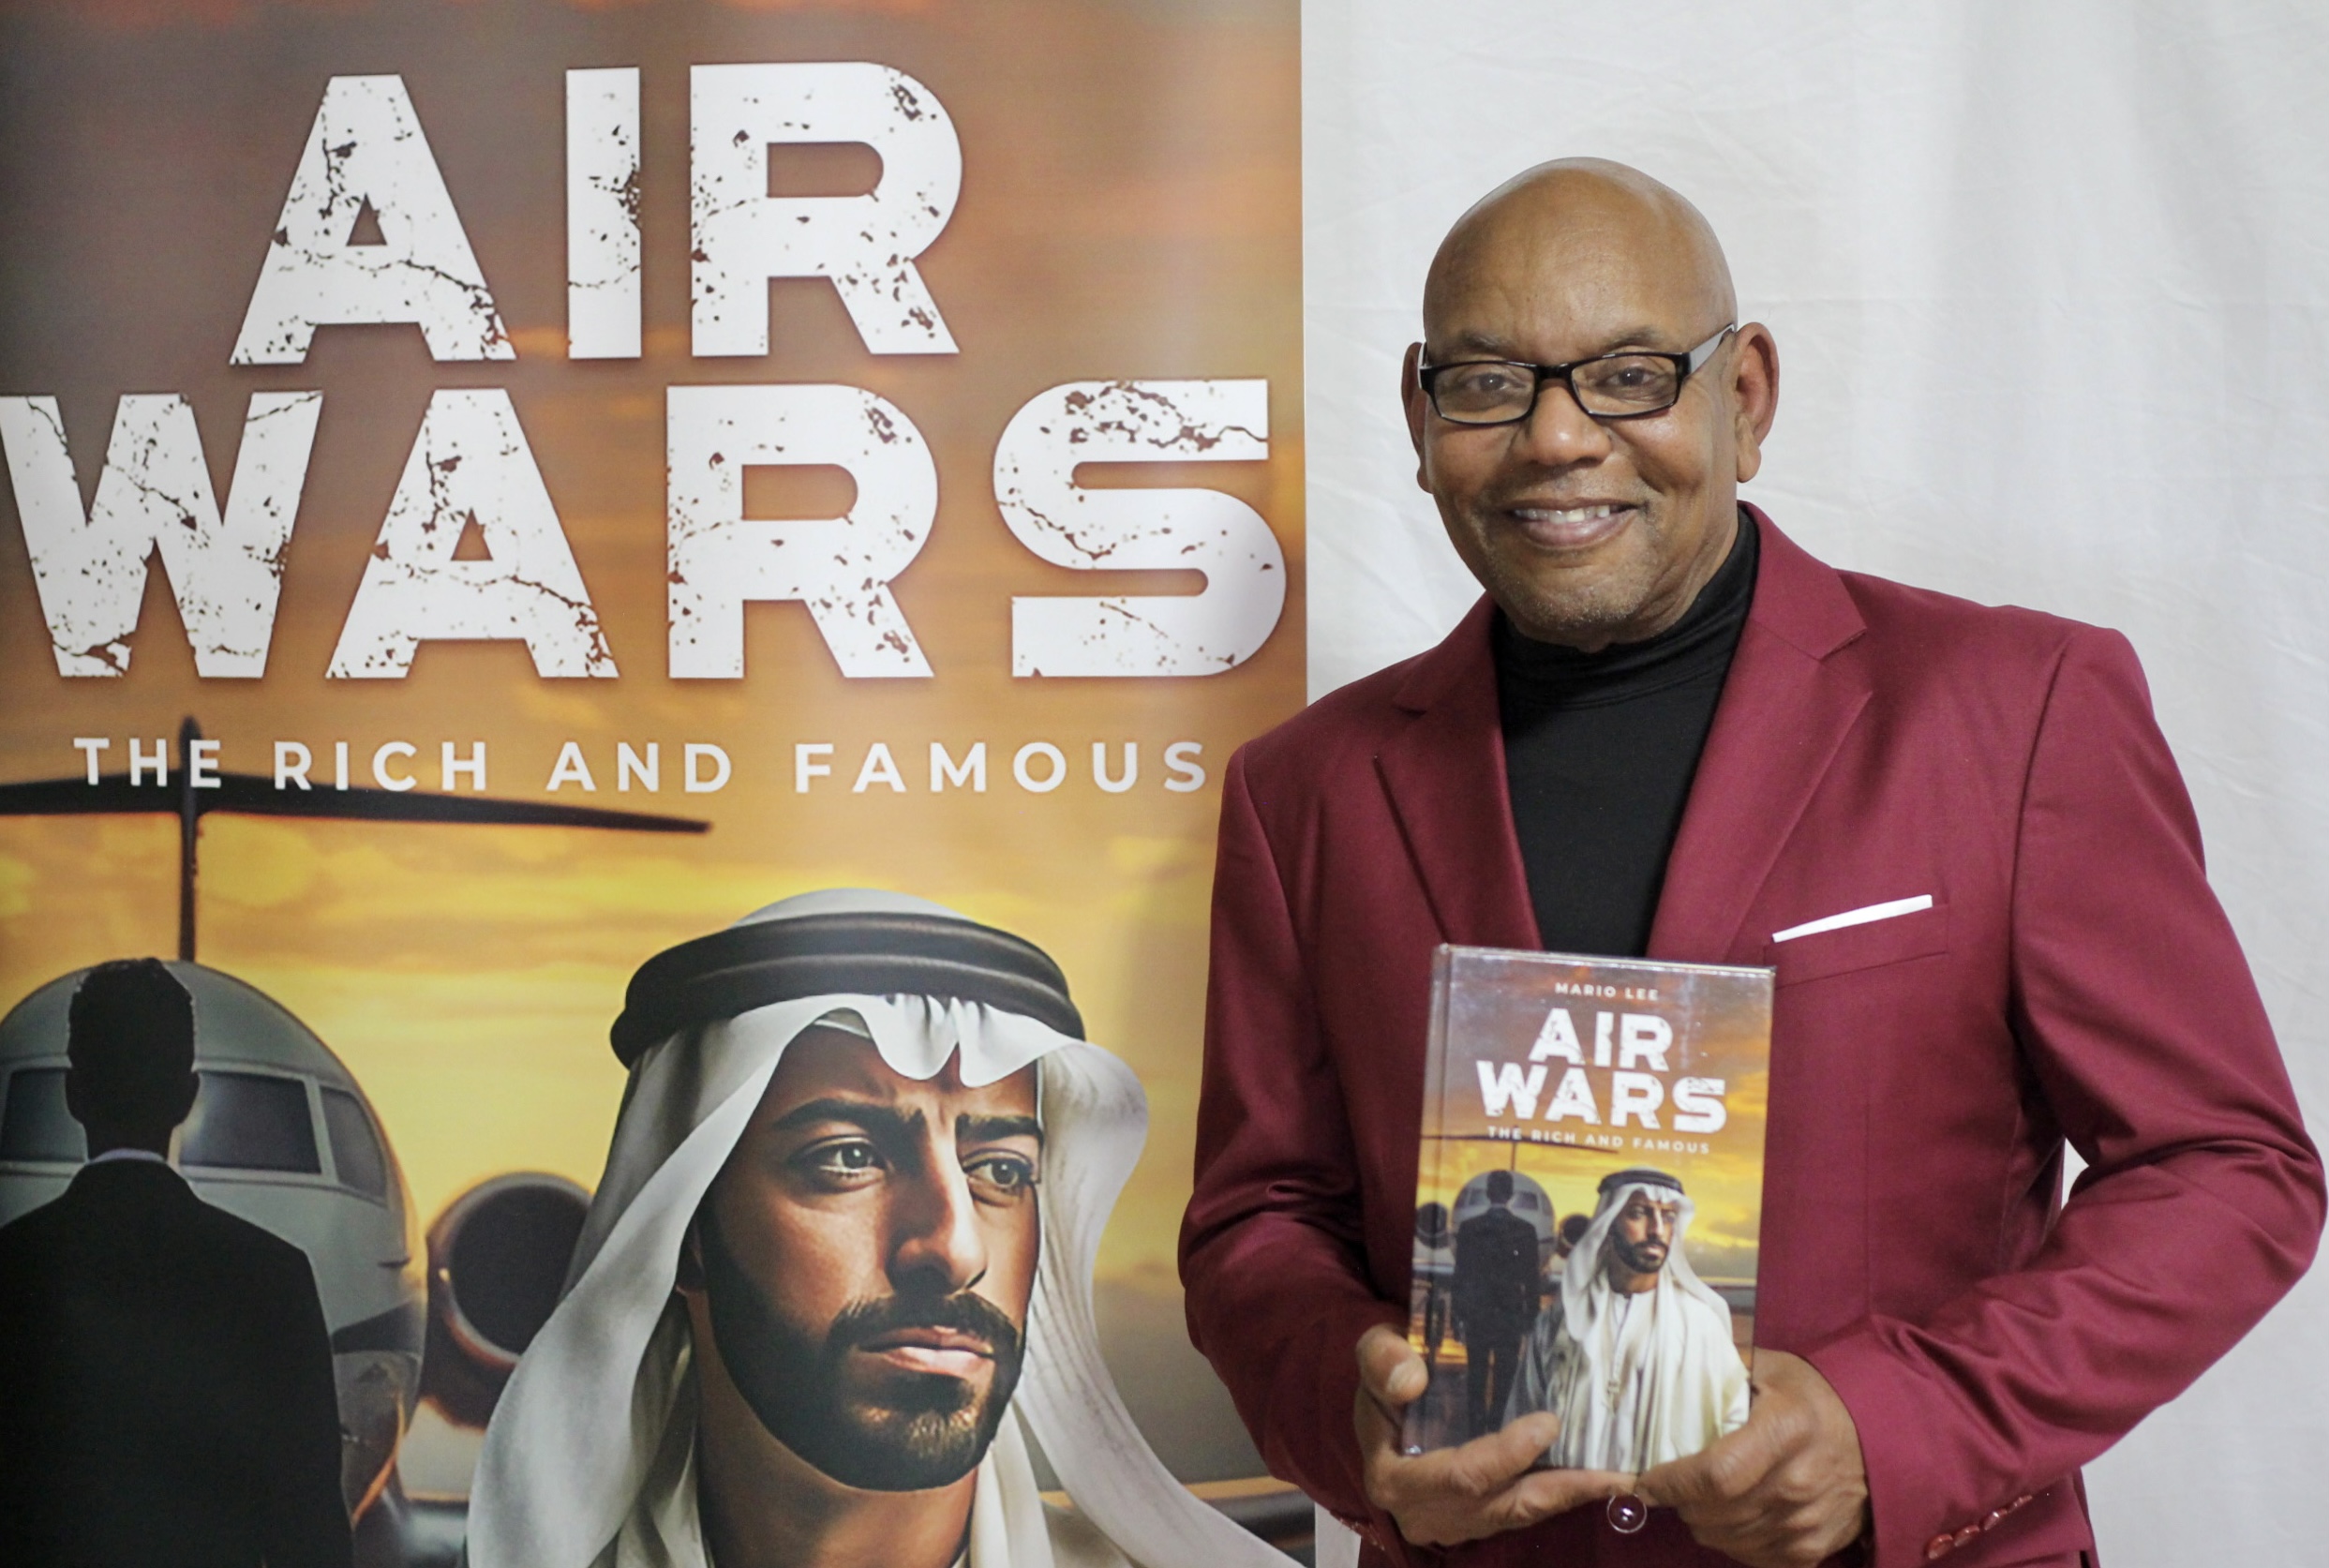 Author Mario Lee Takes Readers on High-Flying Adventure with “Airwars – The Rich and Famous”